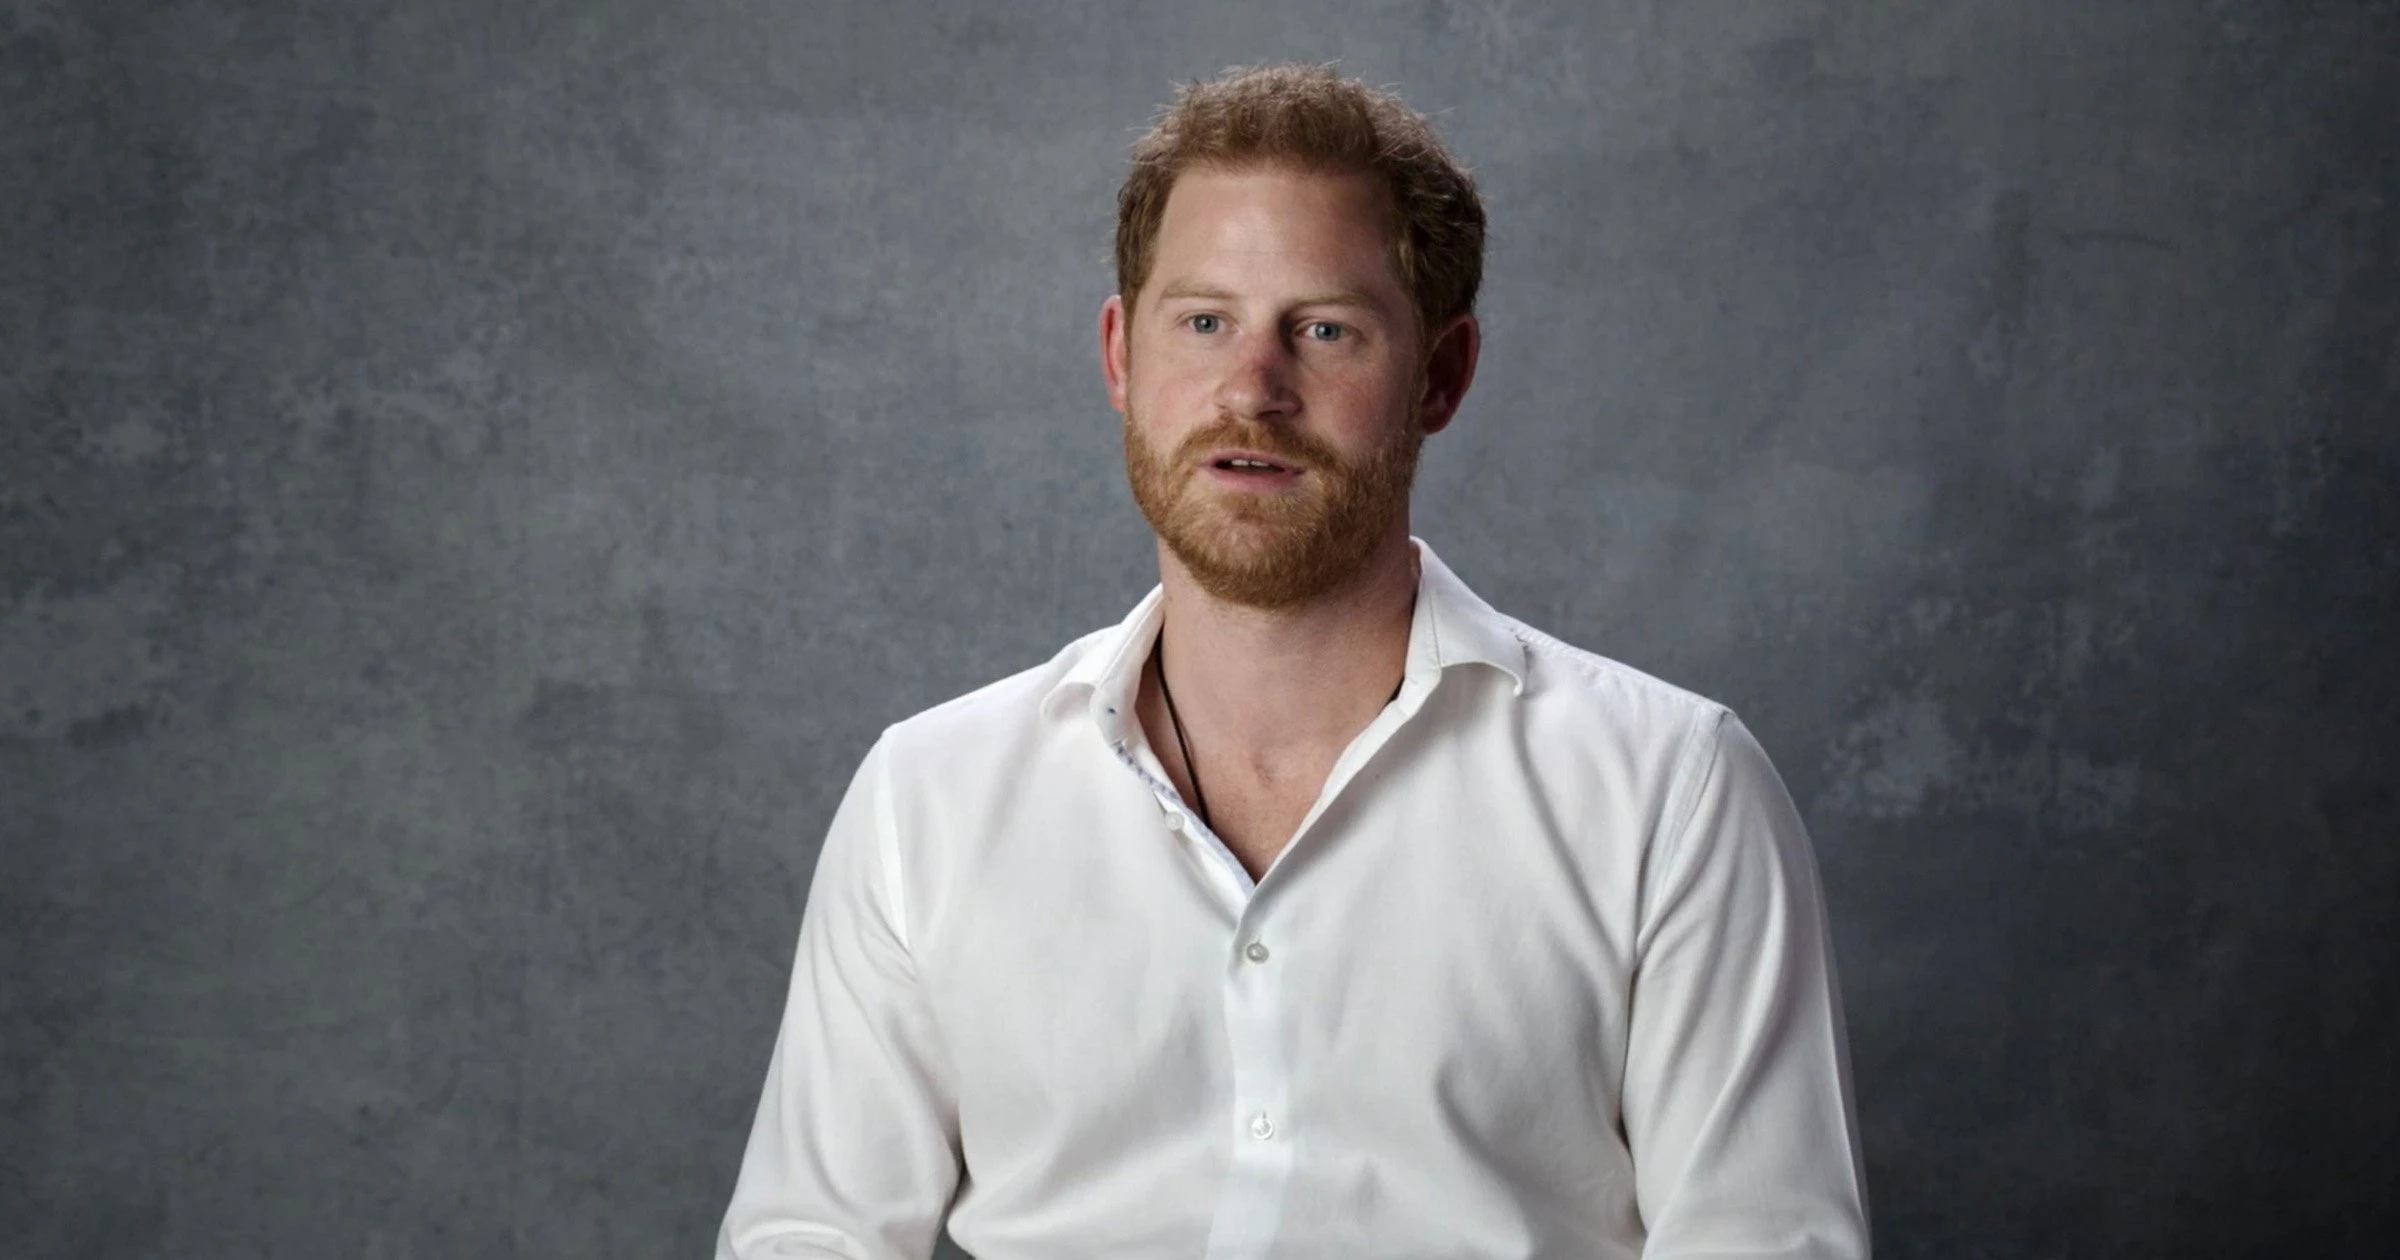 Prince Harry coming out with royal memoir